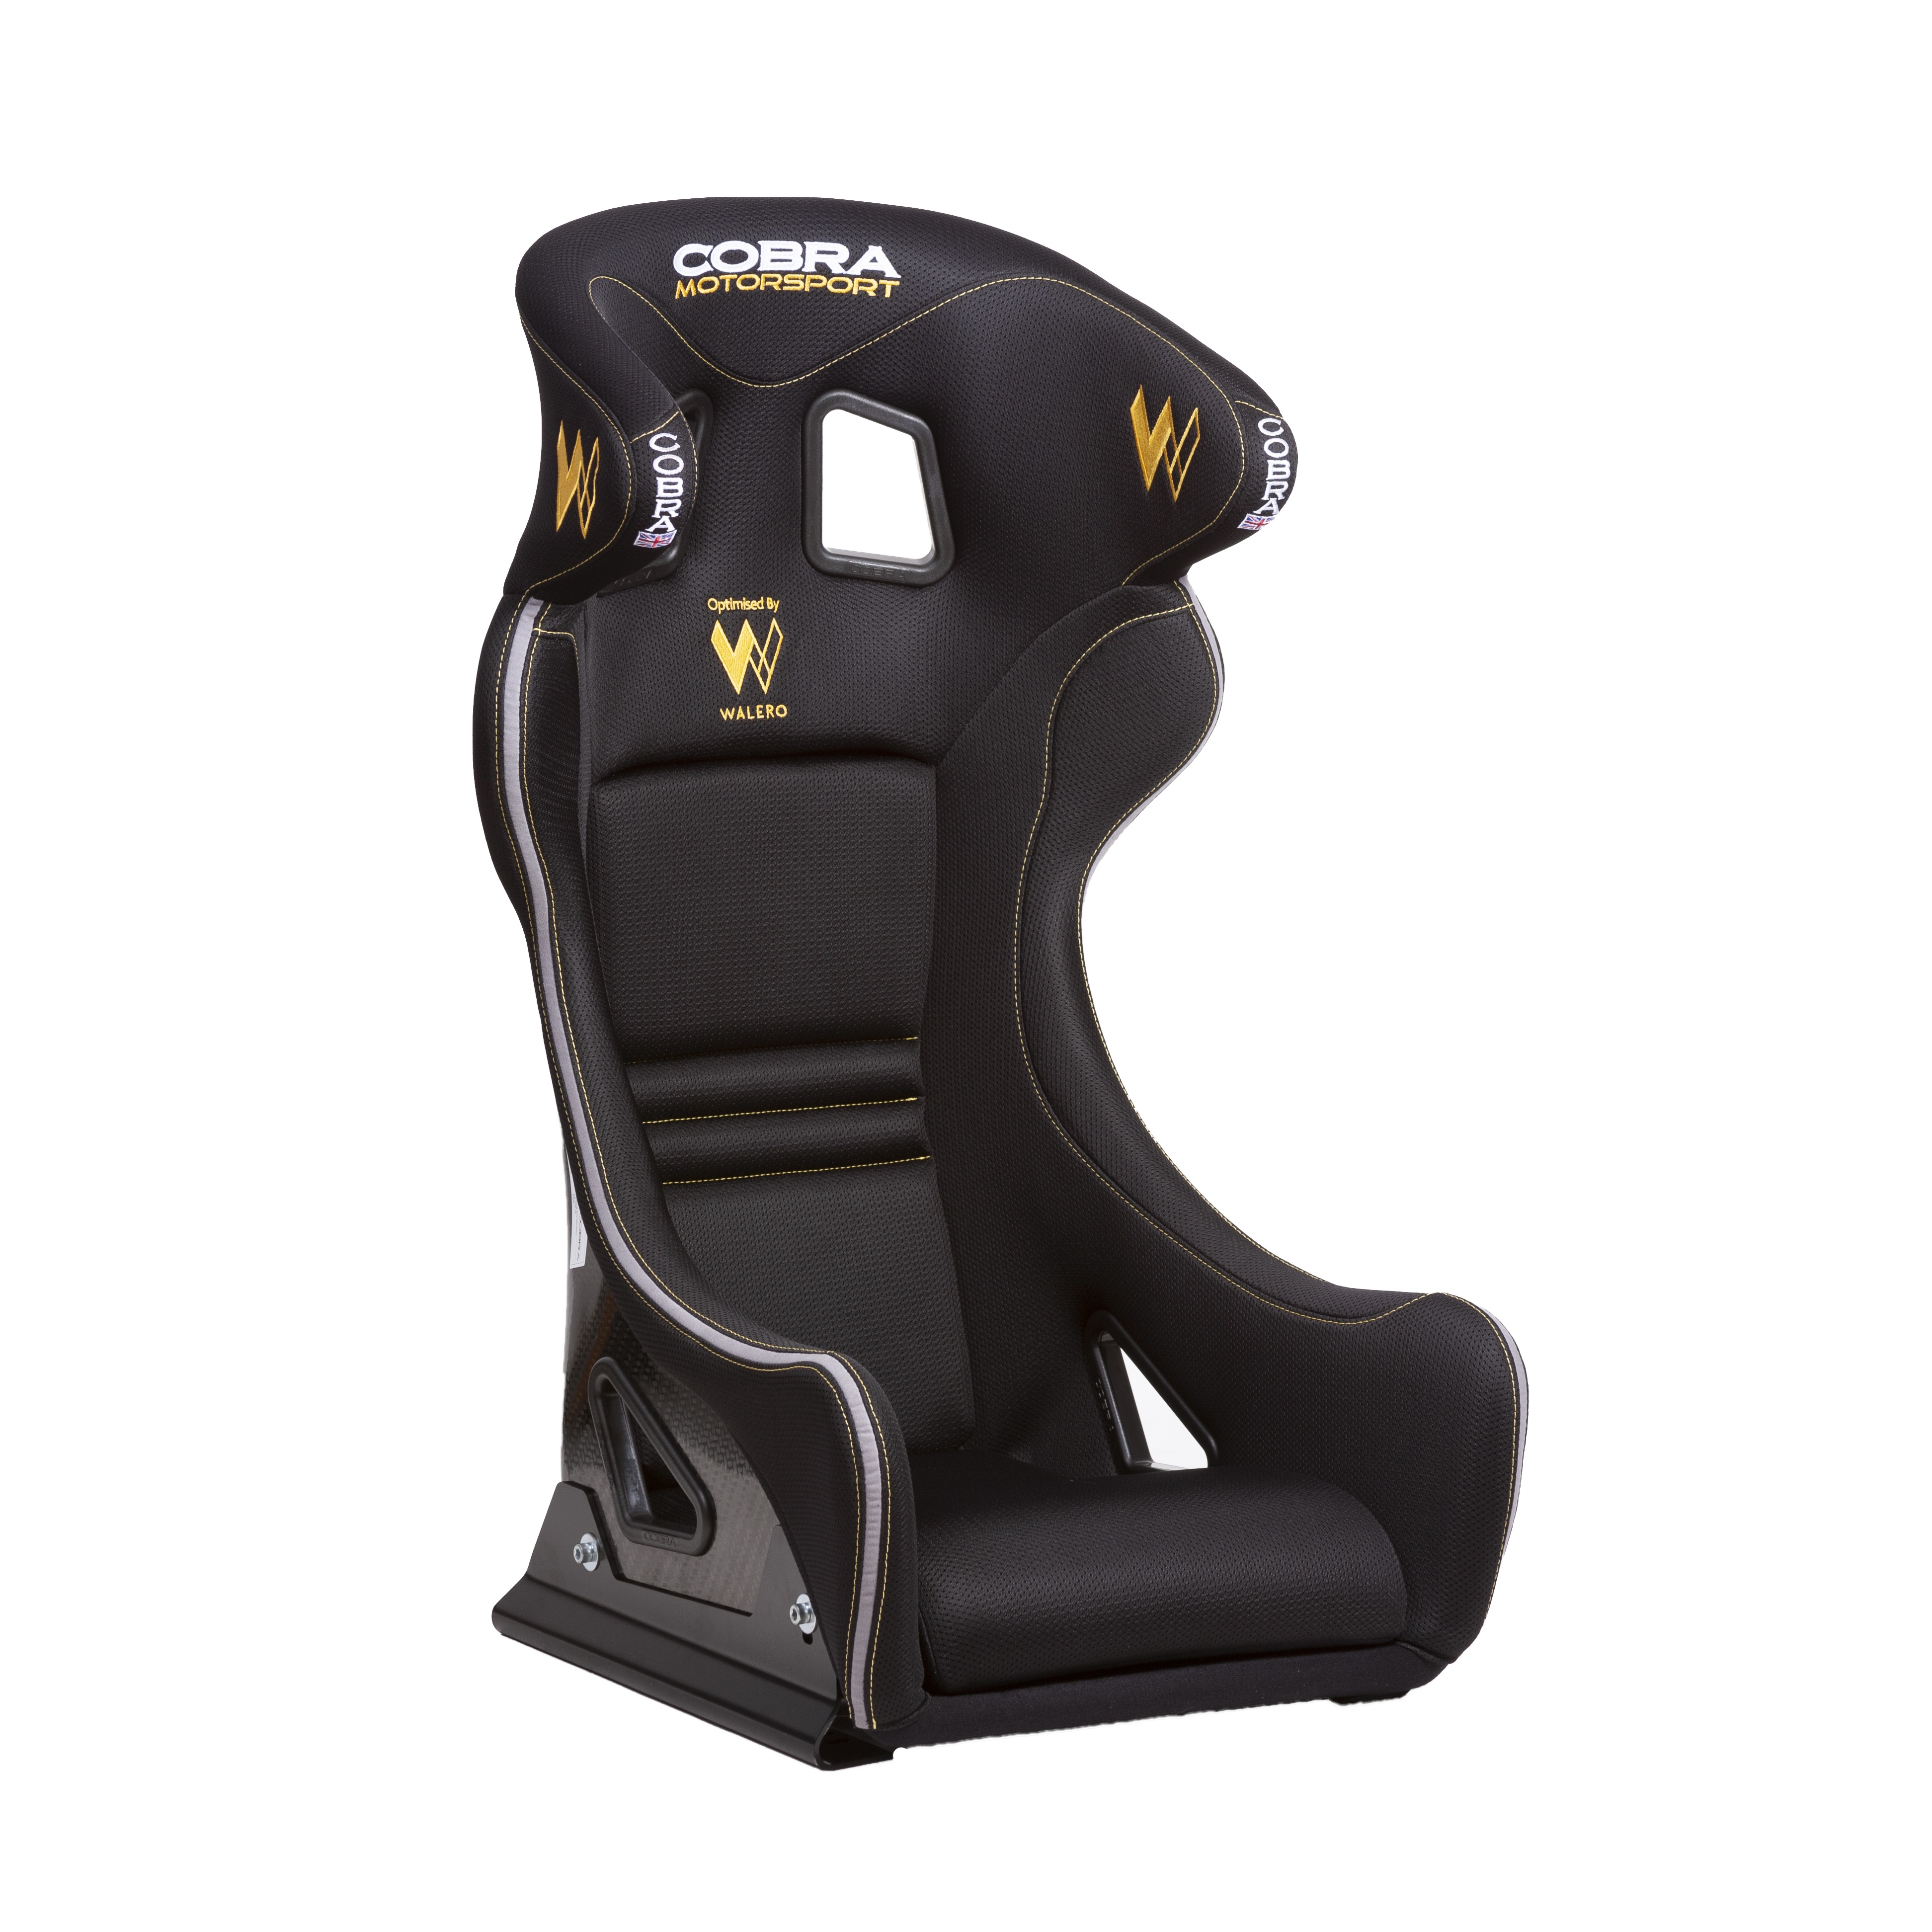 https://www.cobraseats.com/images/products/waleroutralite.jpg